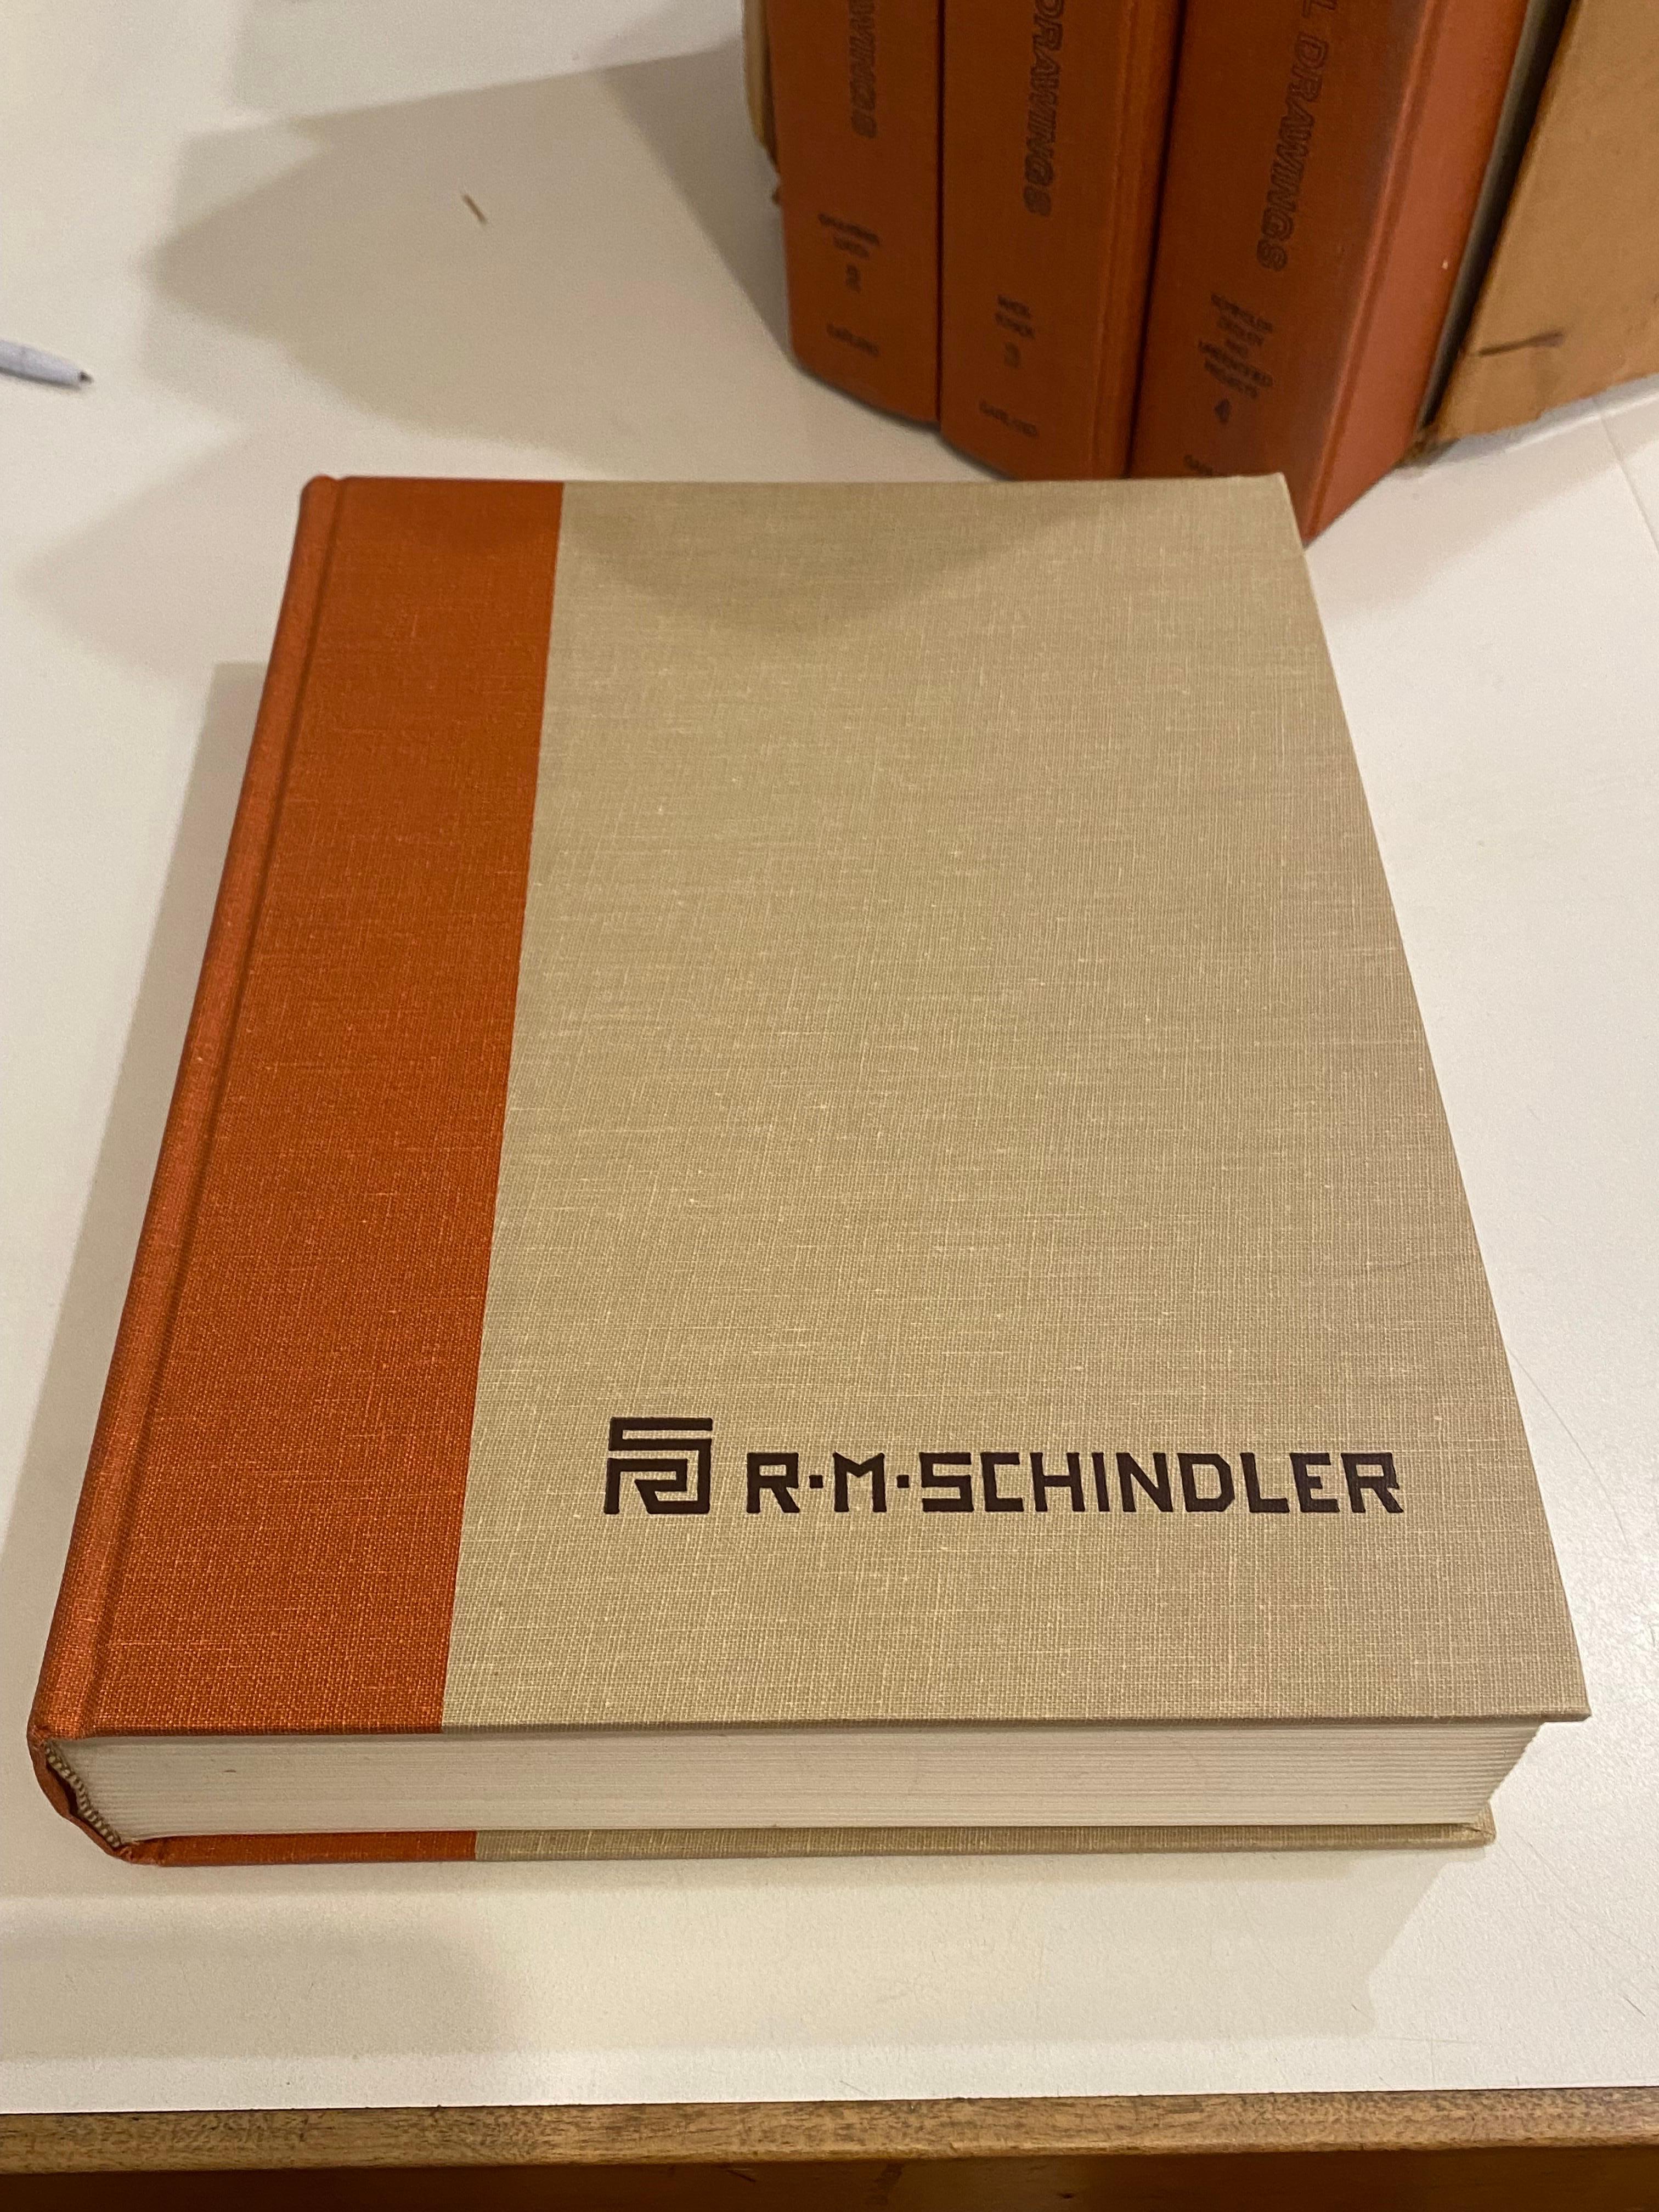 Modern R.M. Schindler 4 volumn Set of his Architectual Drawings For Sale